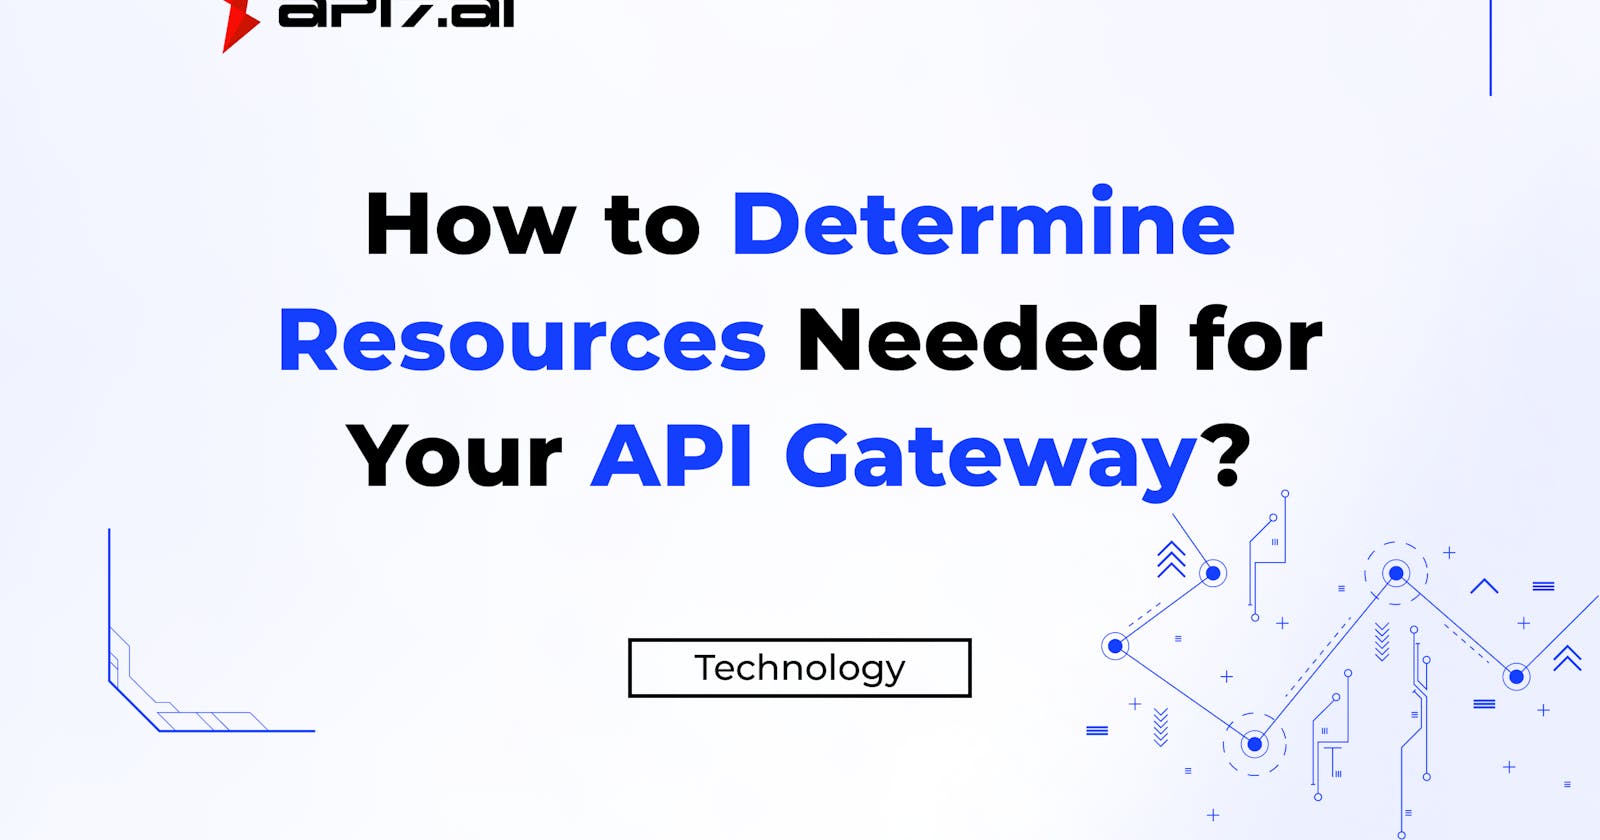 How to Determine Resources Needed for Your API Gateway?